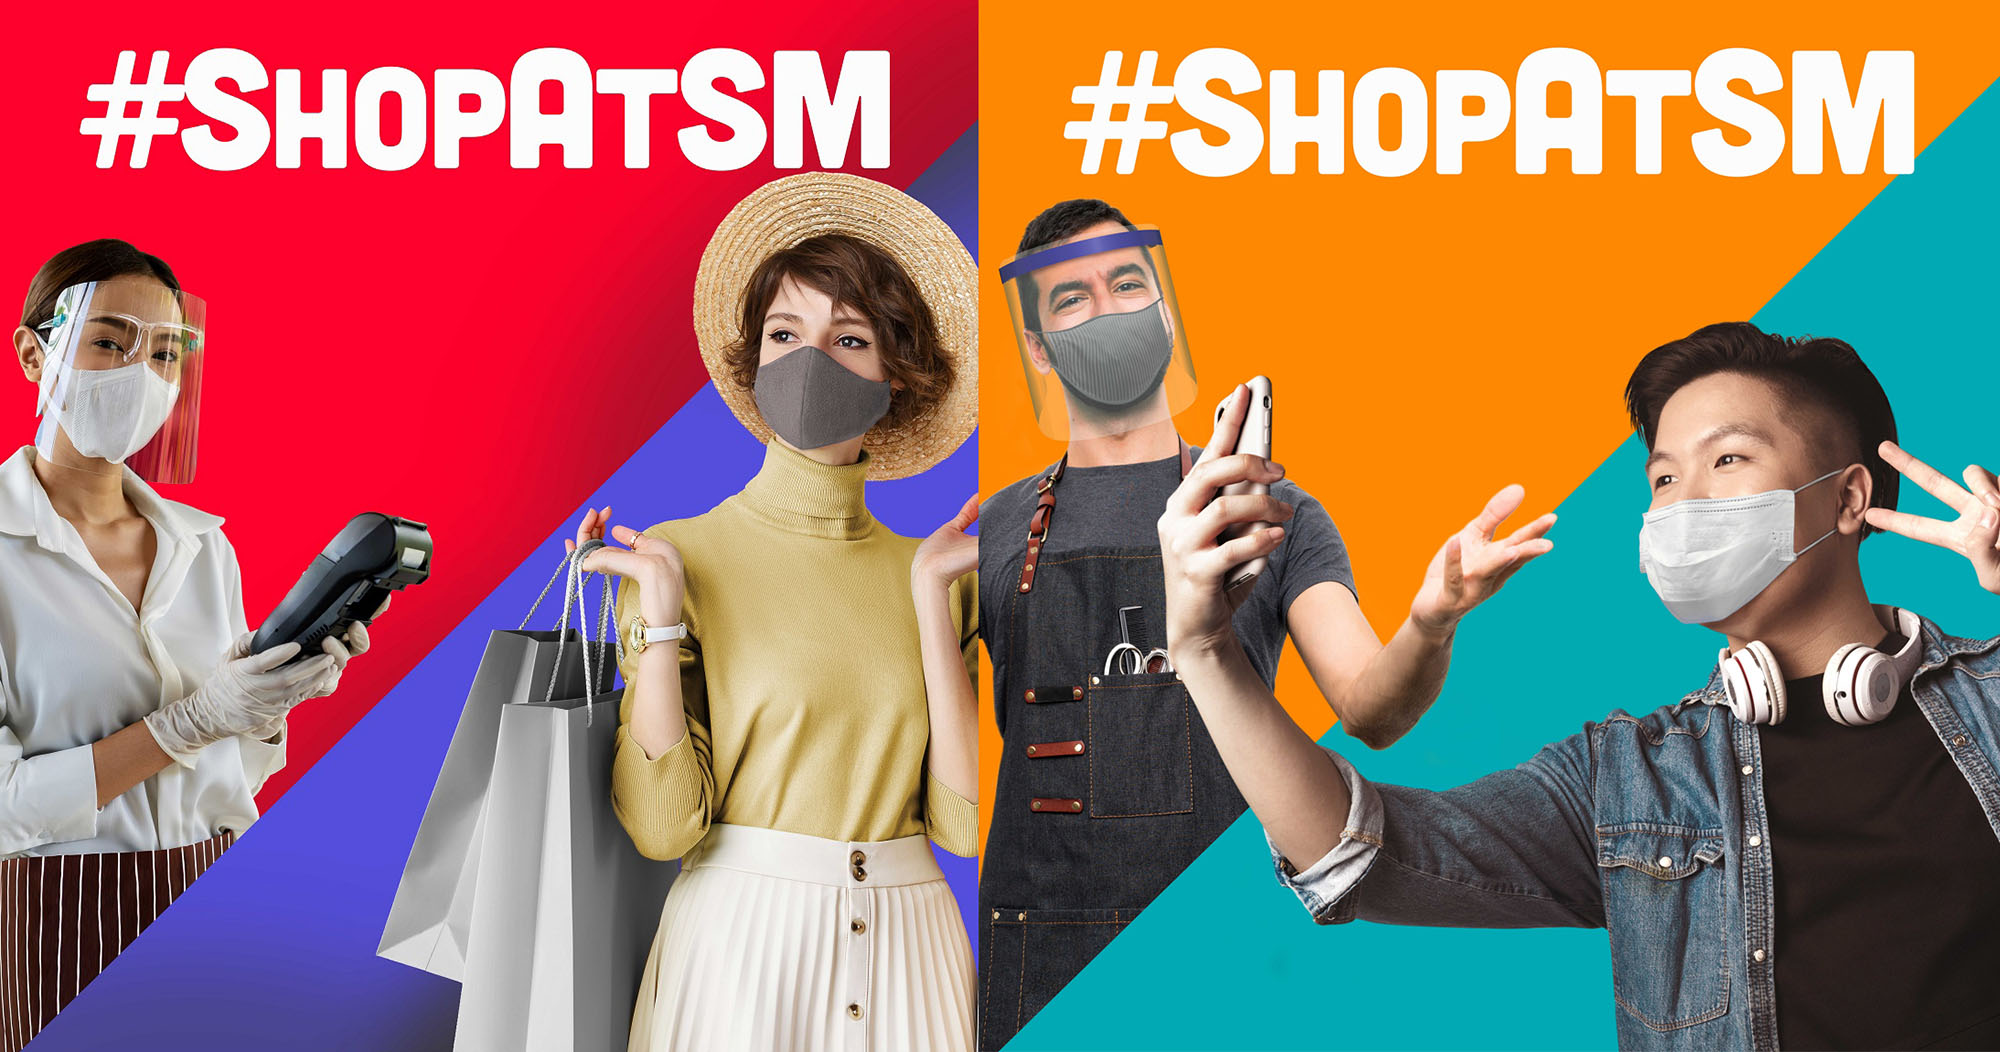 Here’s a handy guide when you #ShopAtSM for your essentials